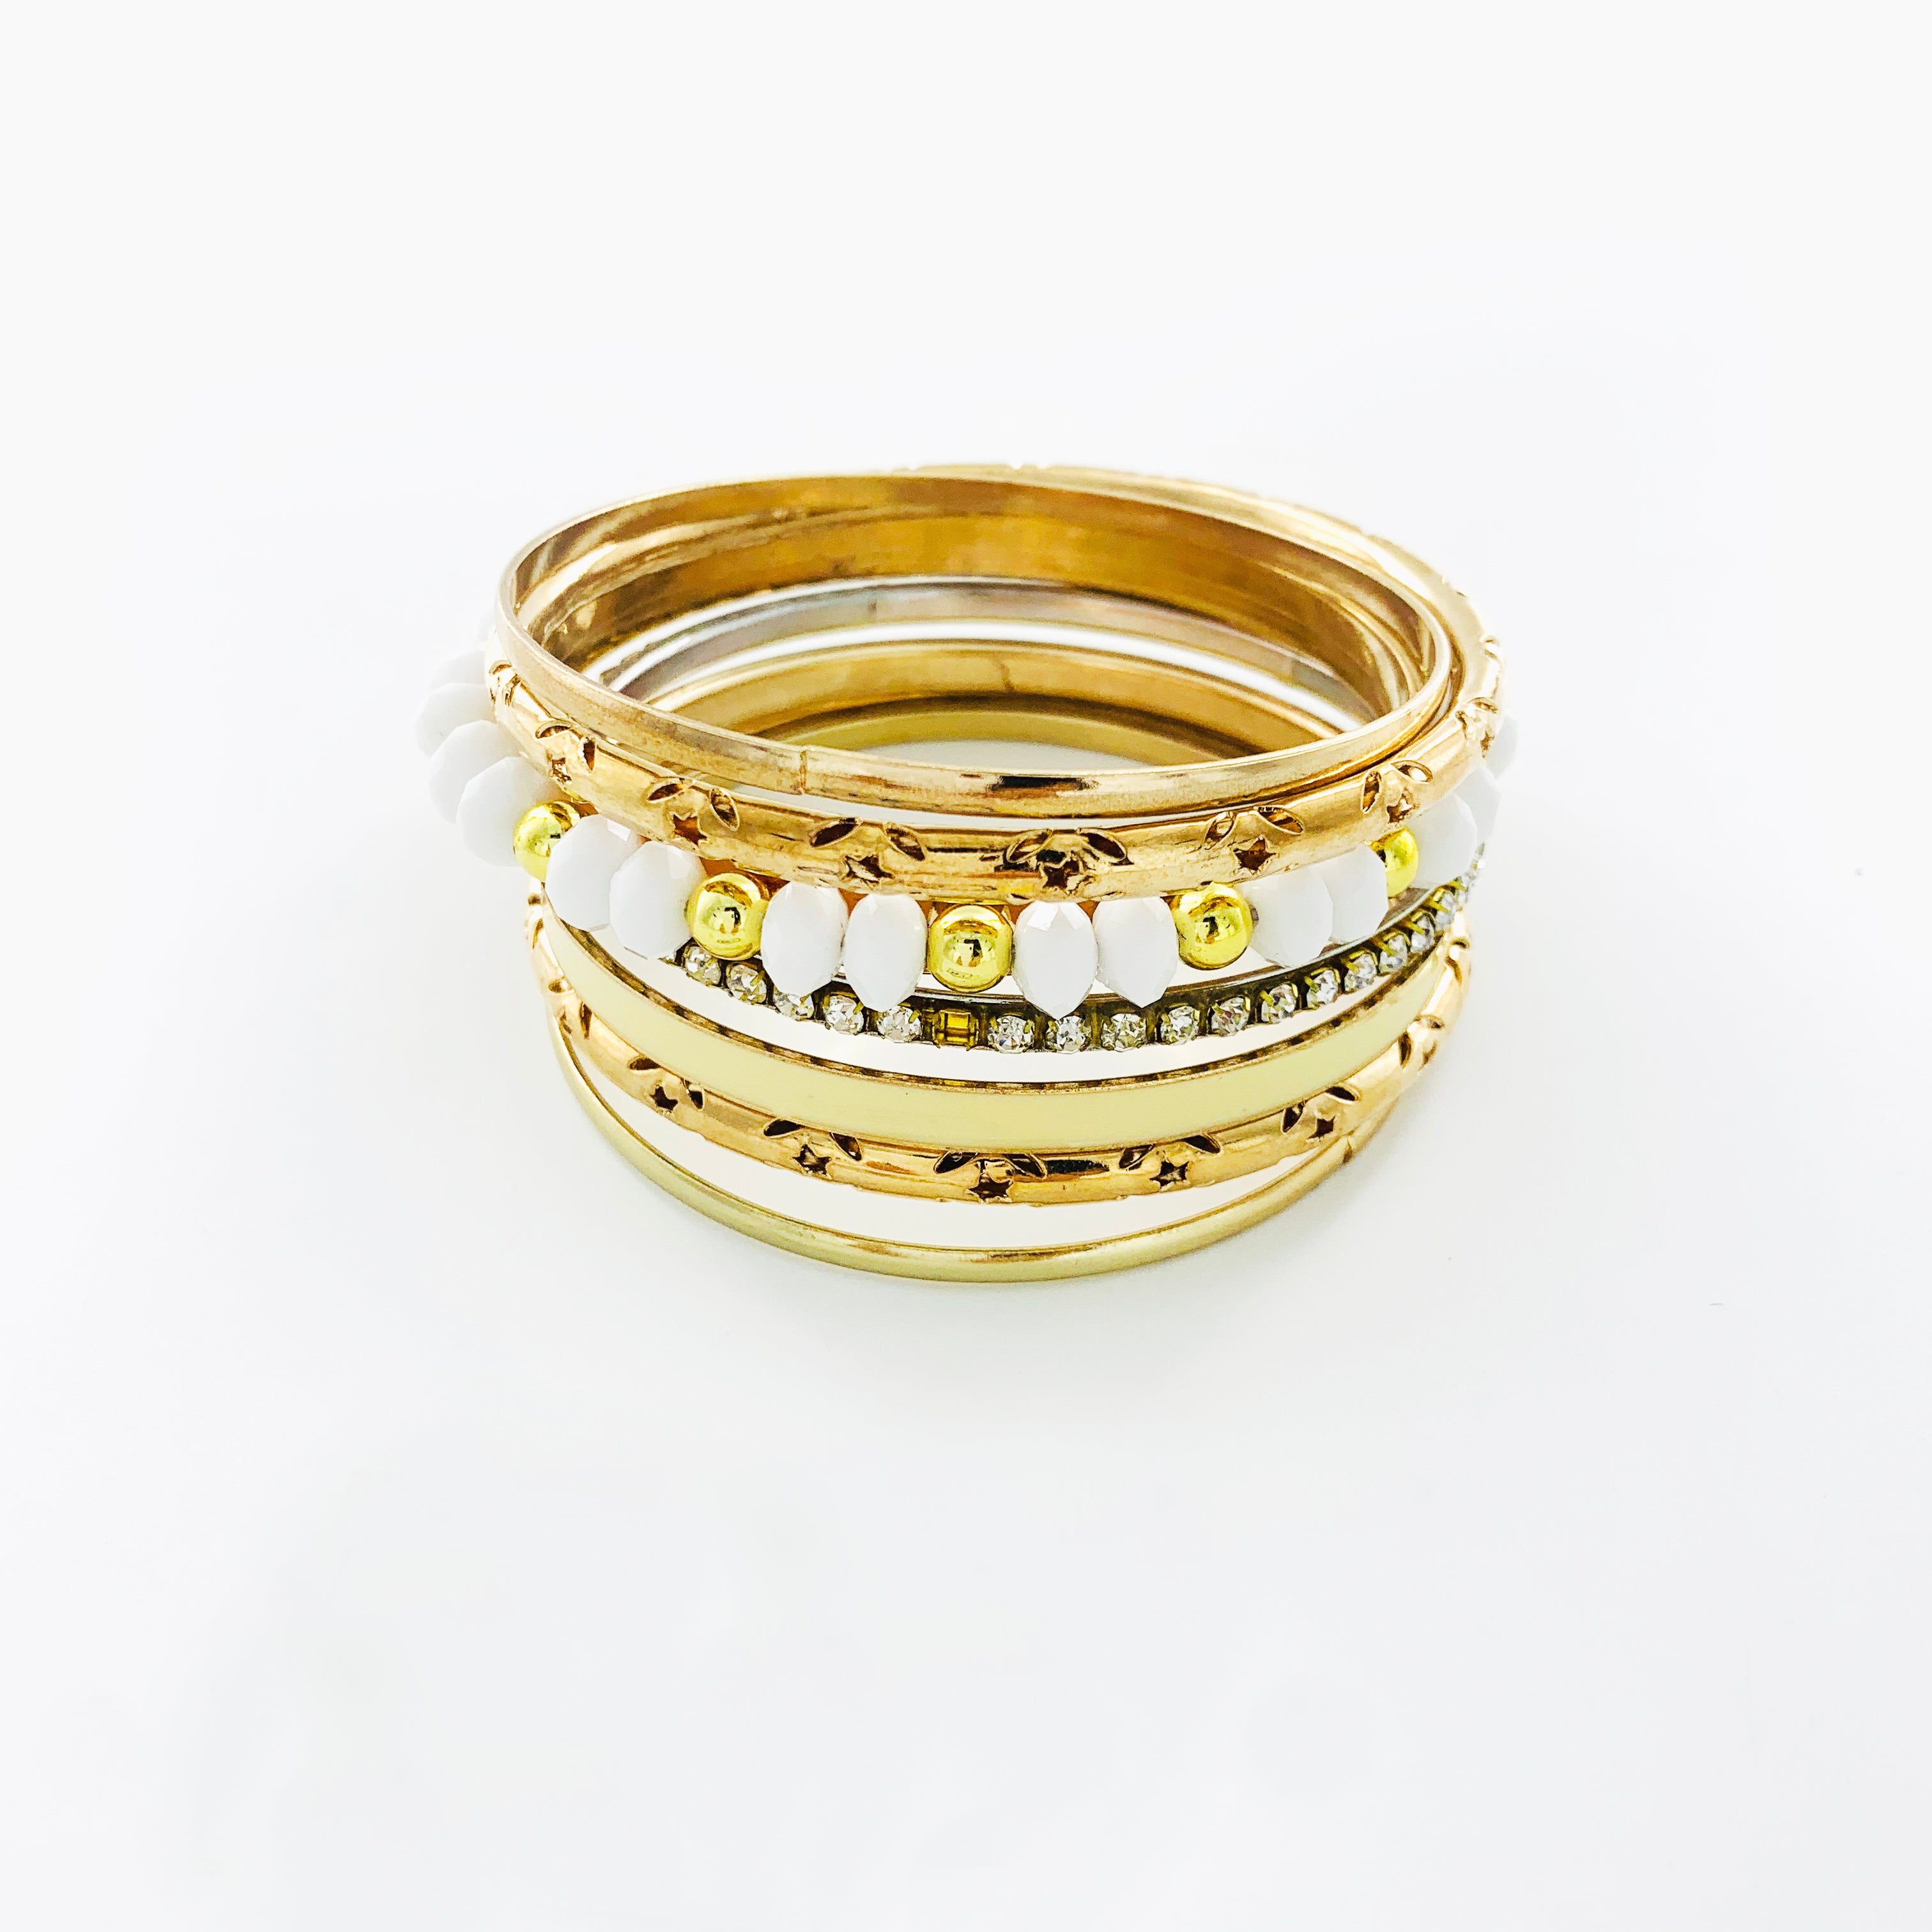 Gold Bangles with White beads and Diamante stones